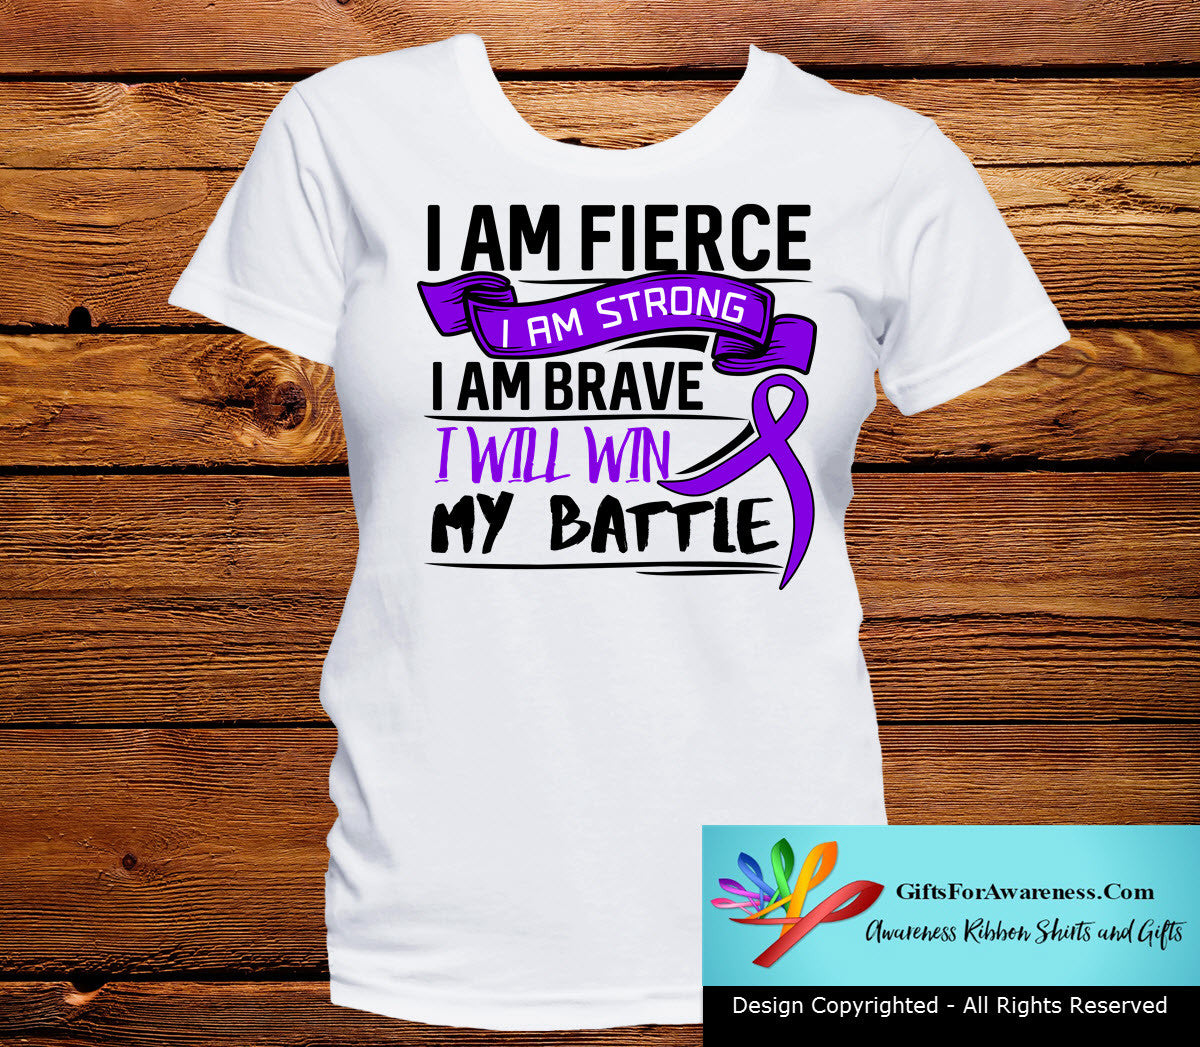 Sjogren's Syndrome I Am Fierce Strong and Brave Shirts - GiftsForAwareness